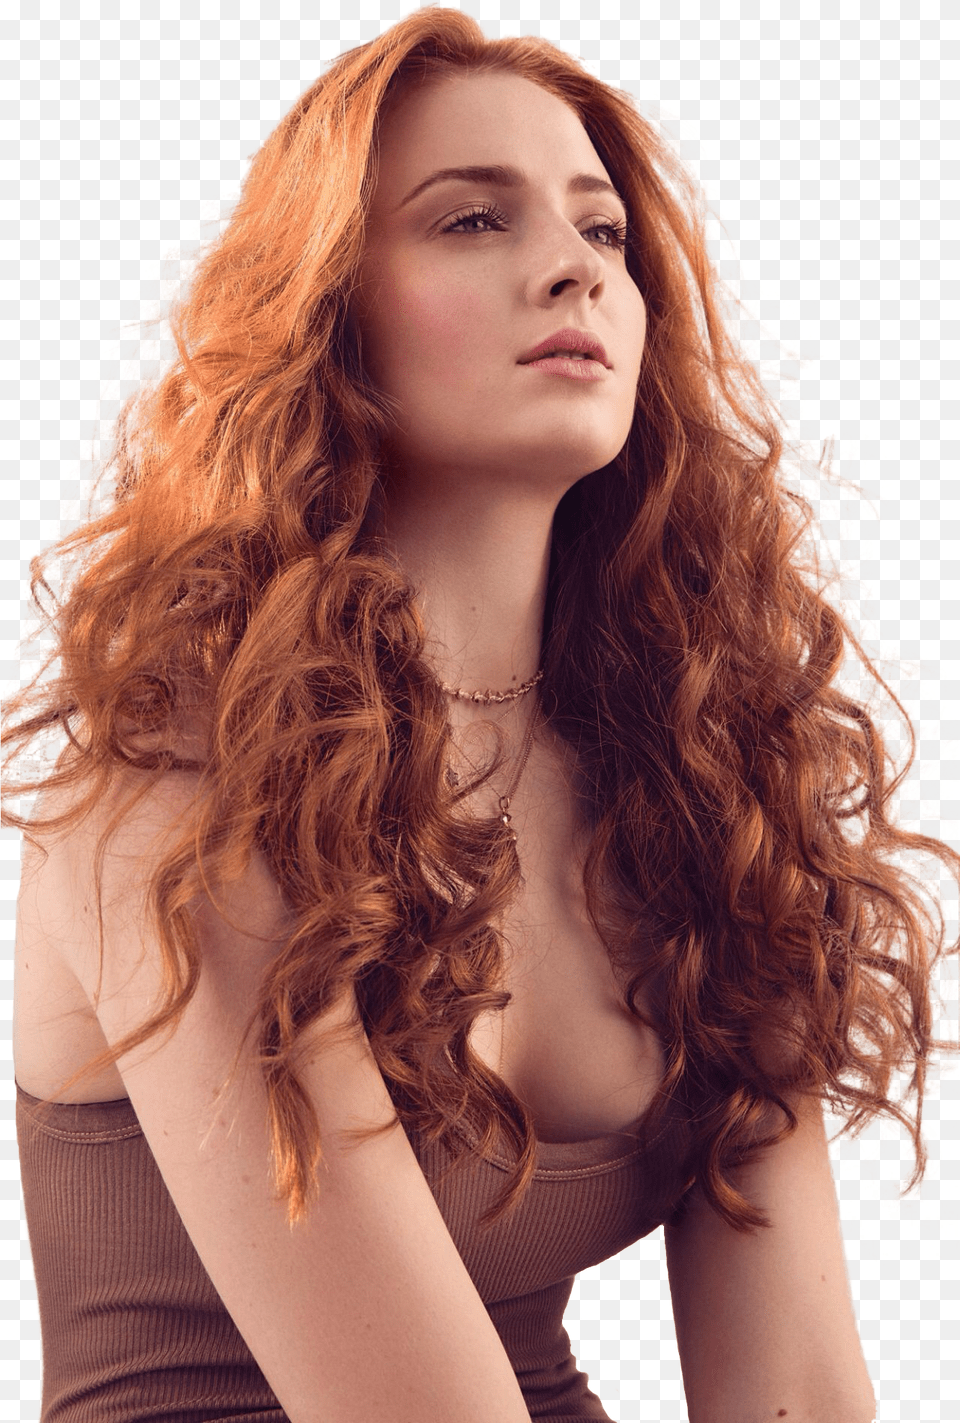 Sharp Cutouts Sophie Turner Red Hair Free Transparent Png